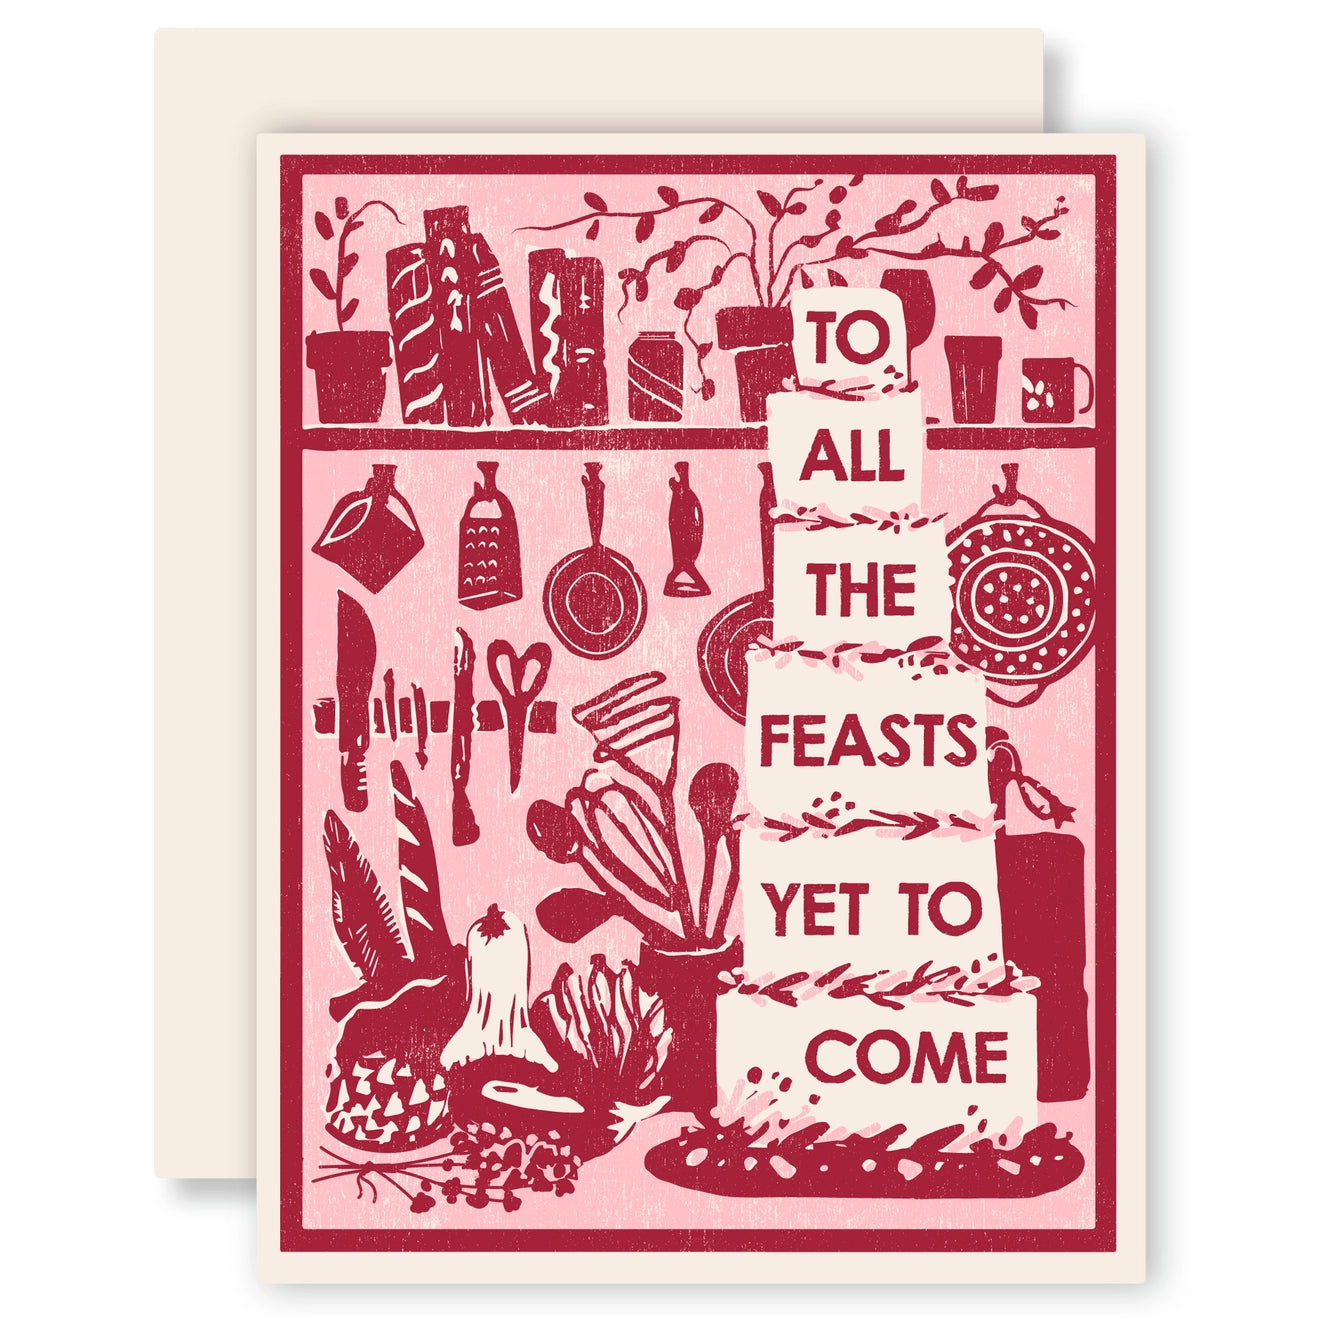 To All The Feasts Yet to Come - Greeting Card